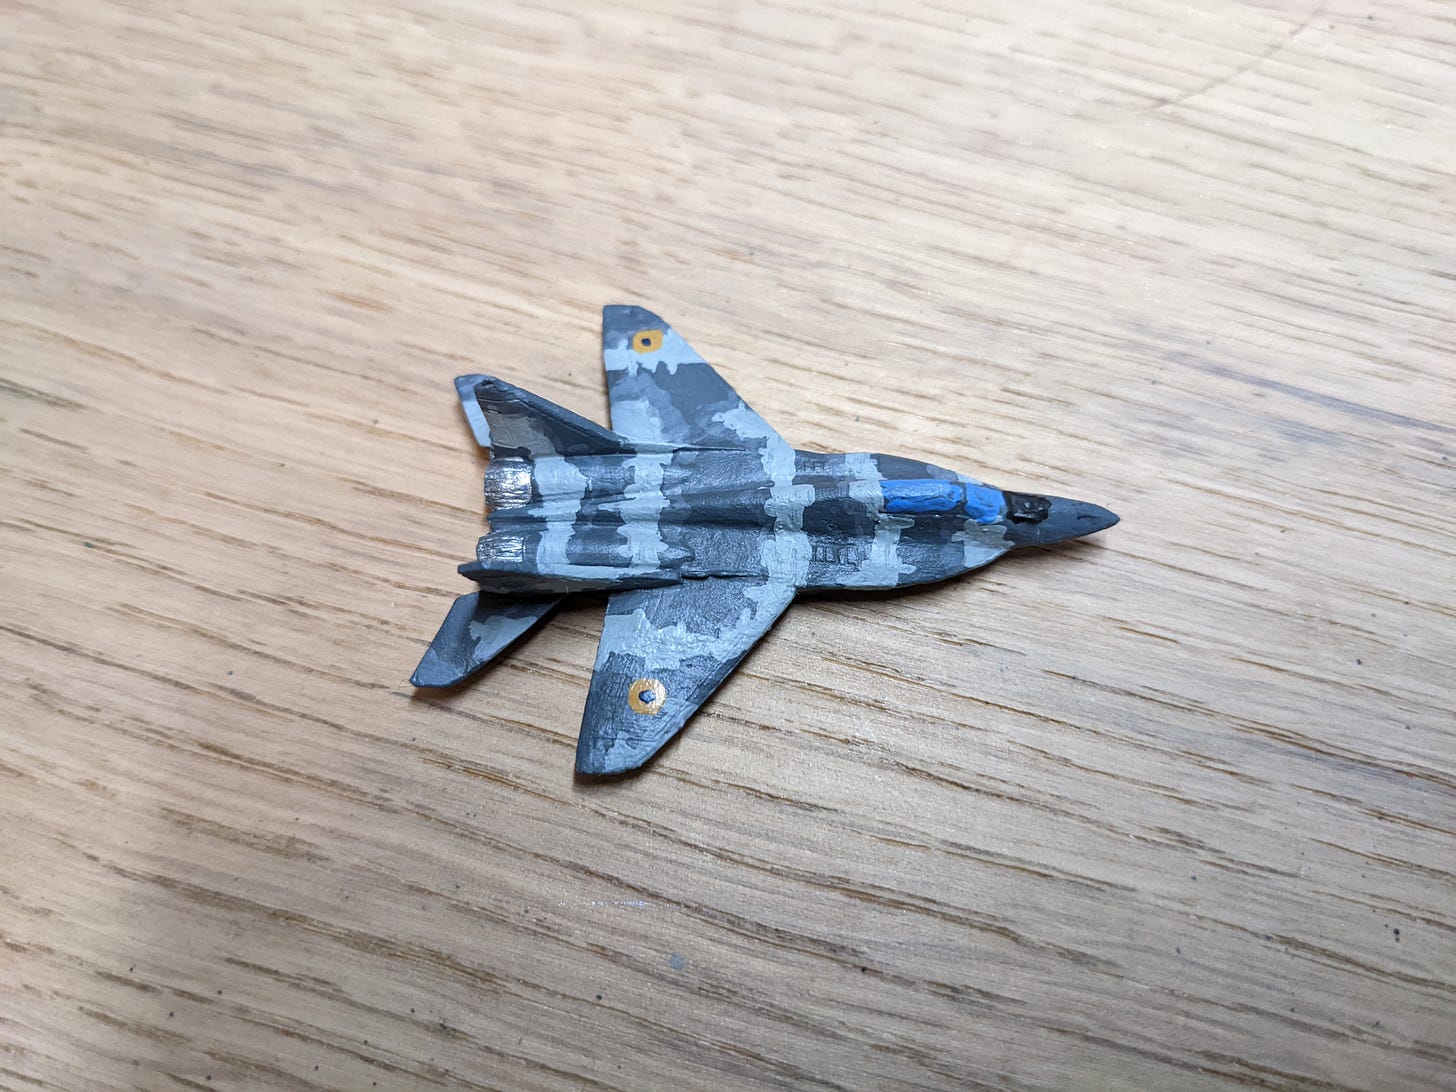 A 6 mm scale model of a Mig-29 fighter painted in the style of the 'Ghost of Kyiv' jet fighter of the Ukrainian air force